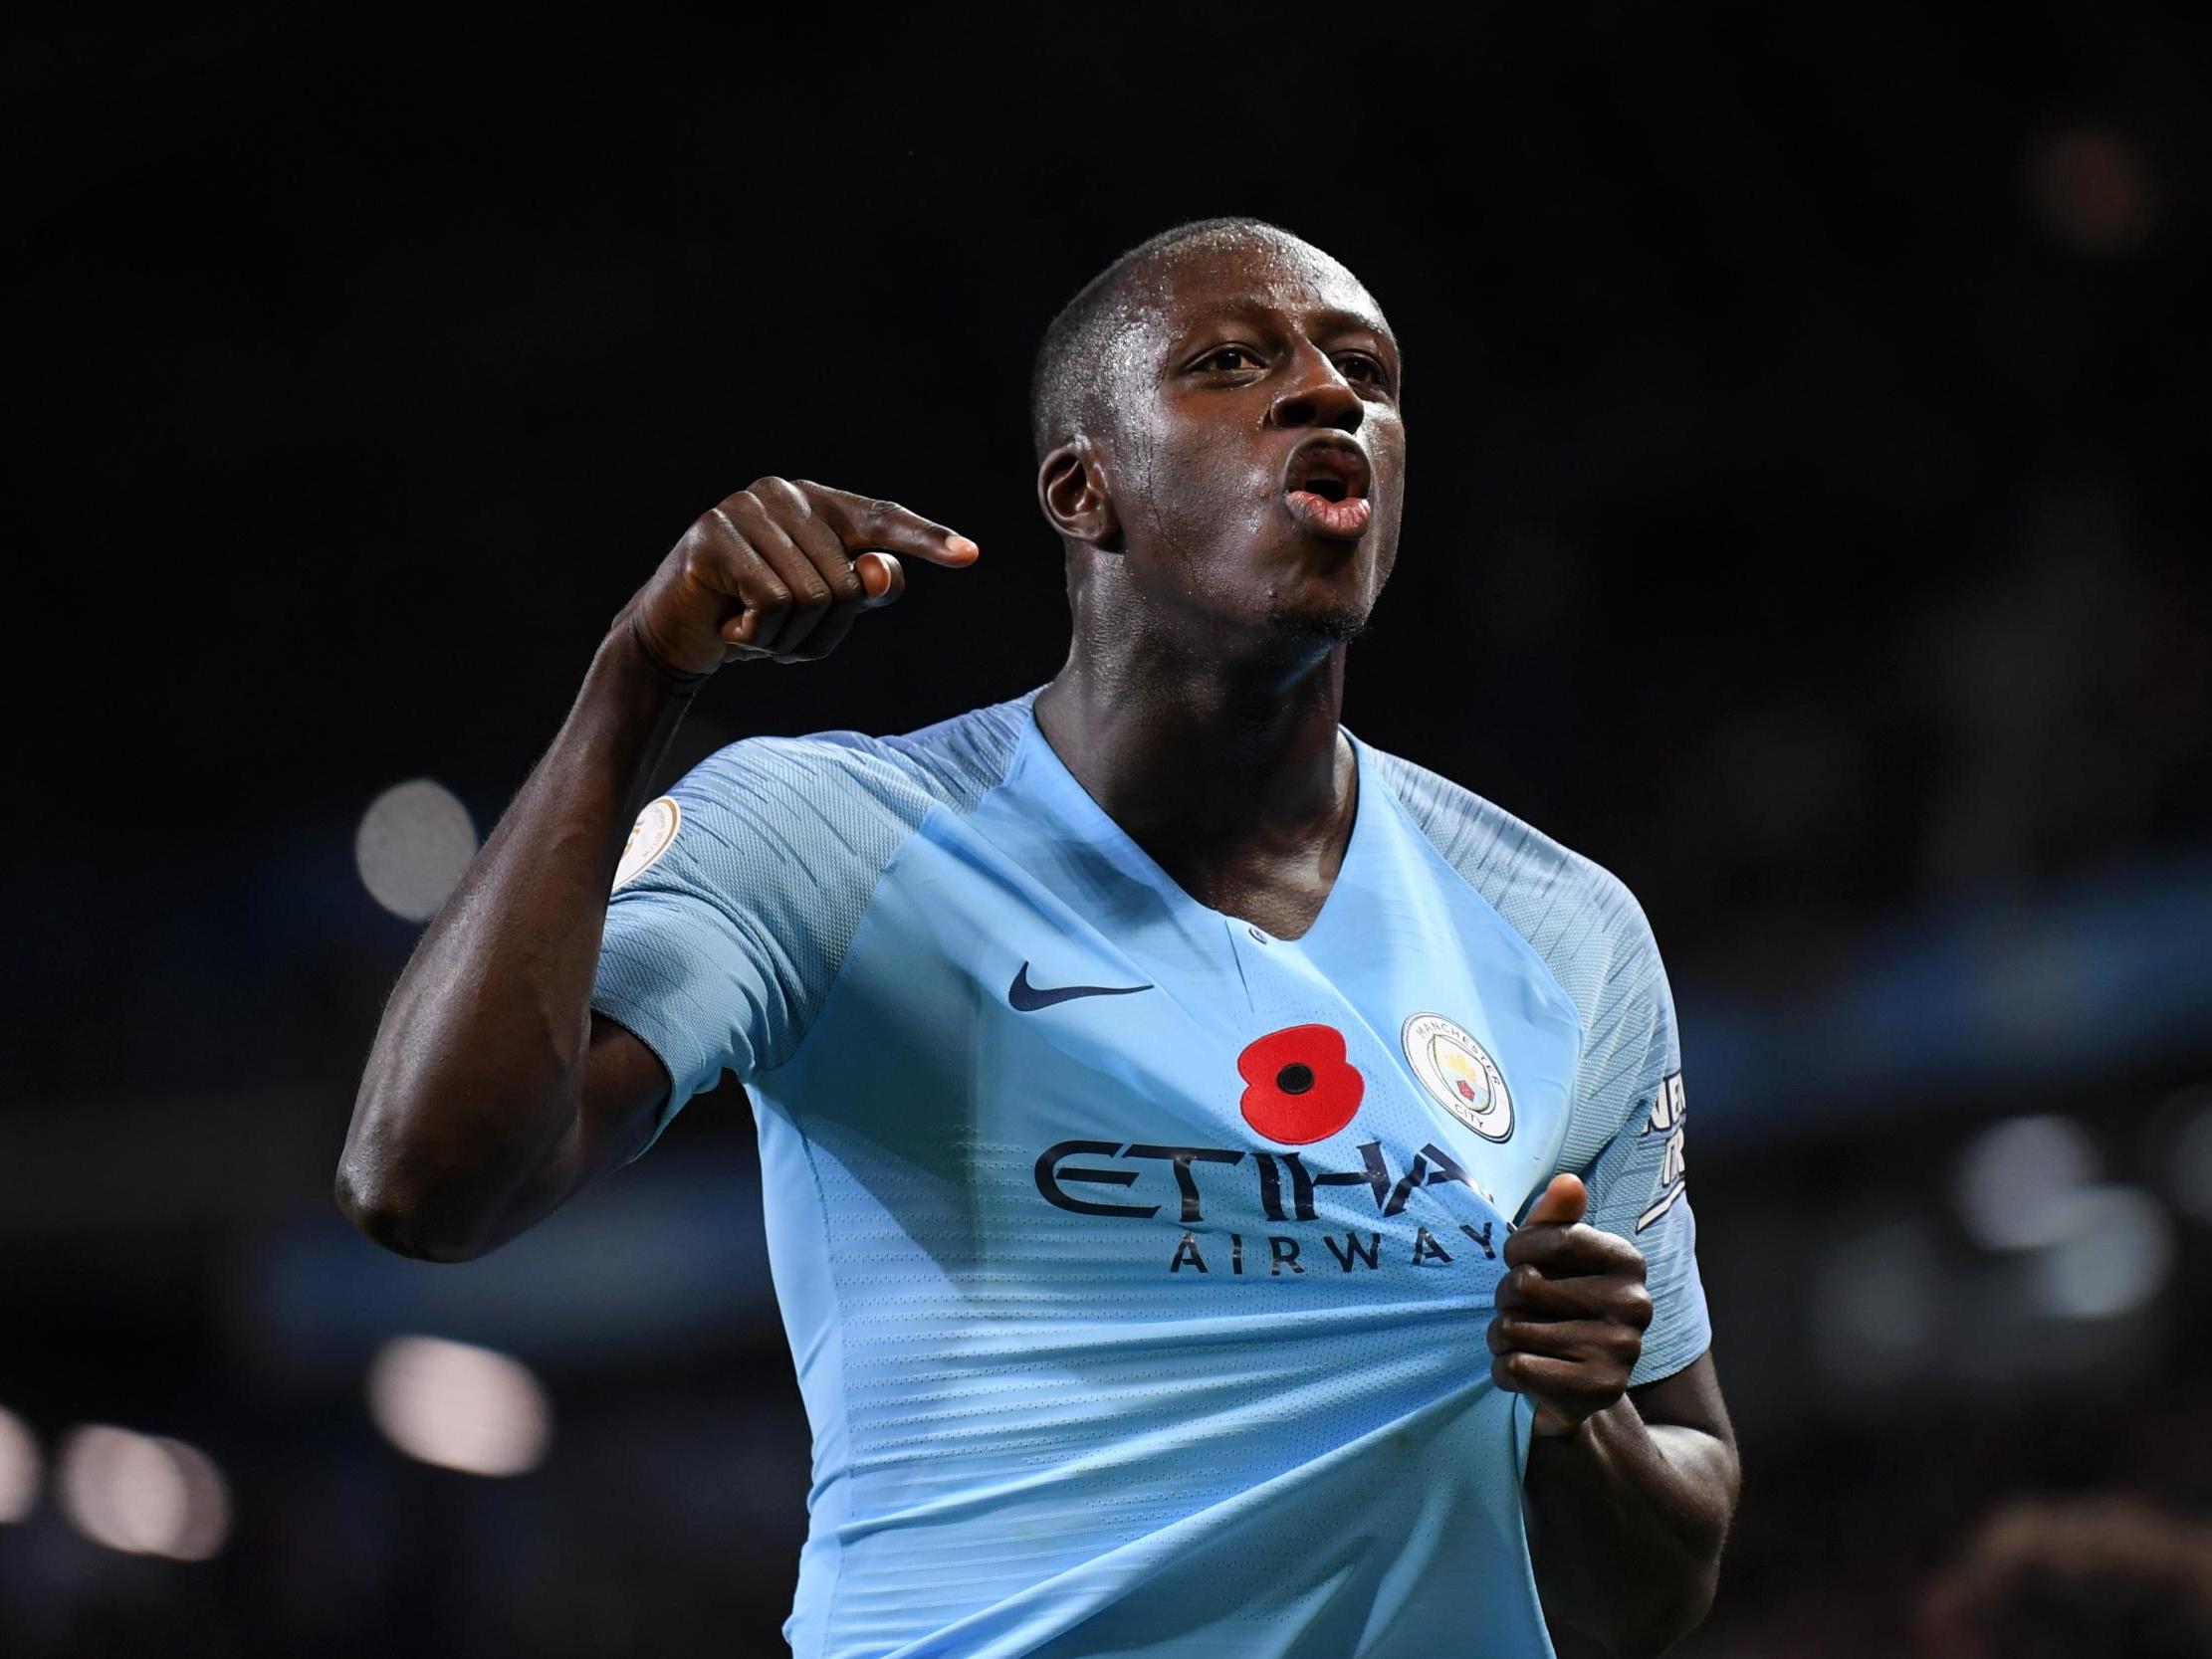 Benjamin Mendy celebrates victory after the final whistle